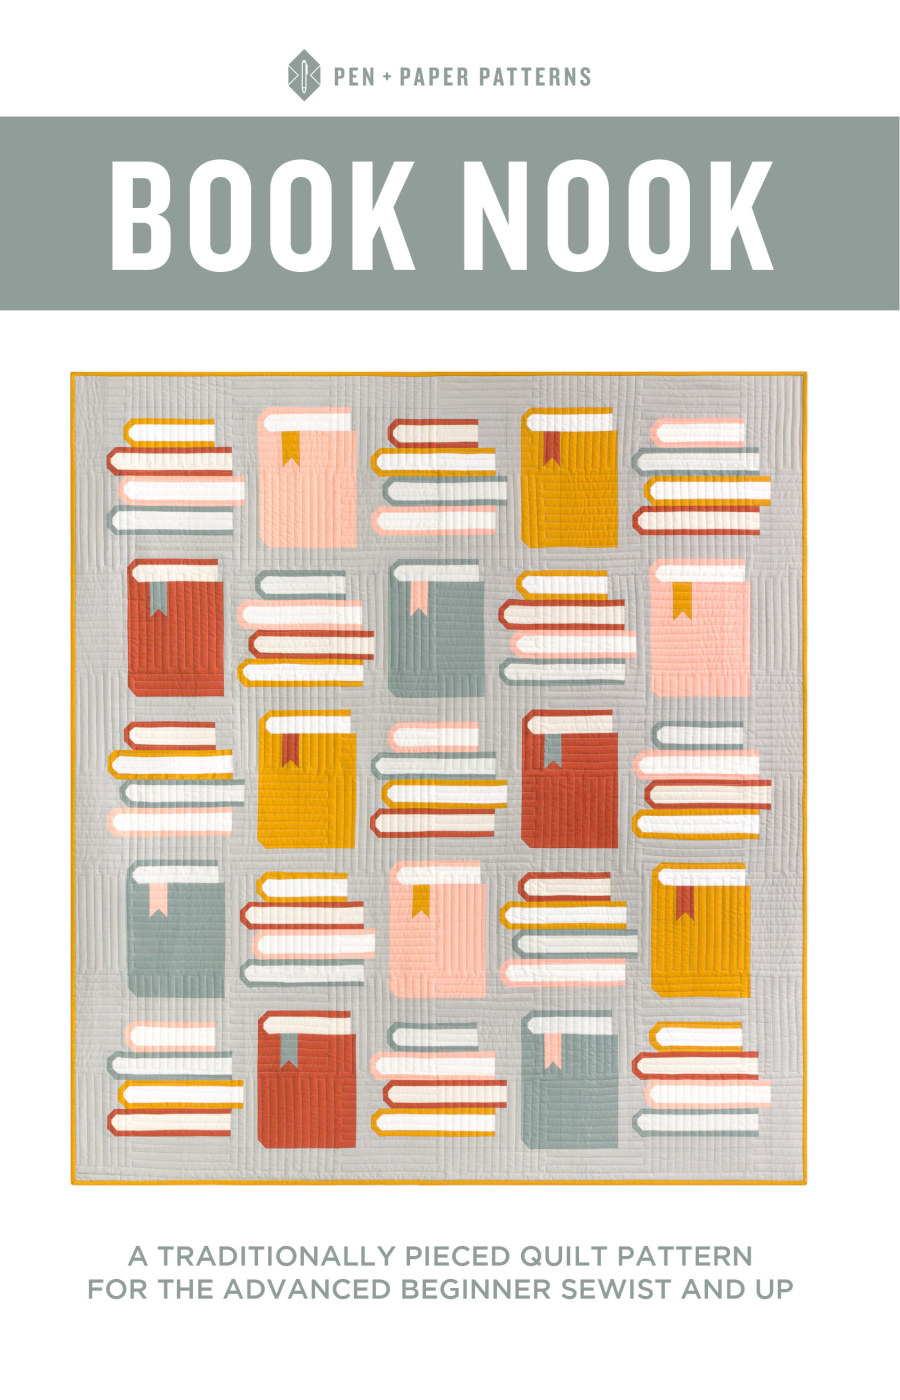 Book Nook Quilt Pattern by Pen + Paper